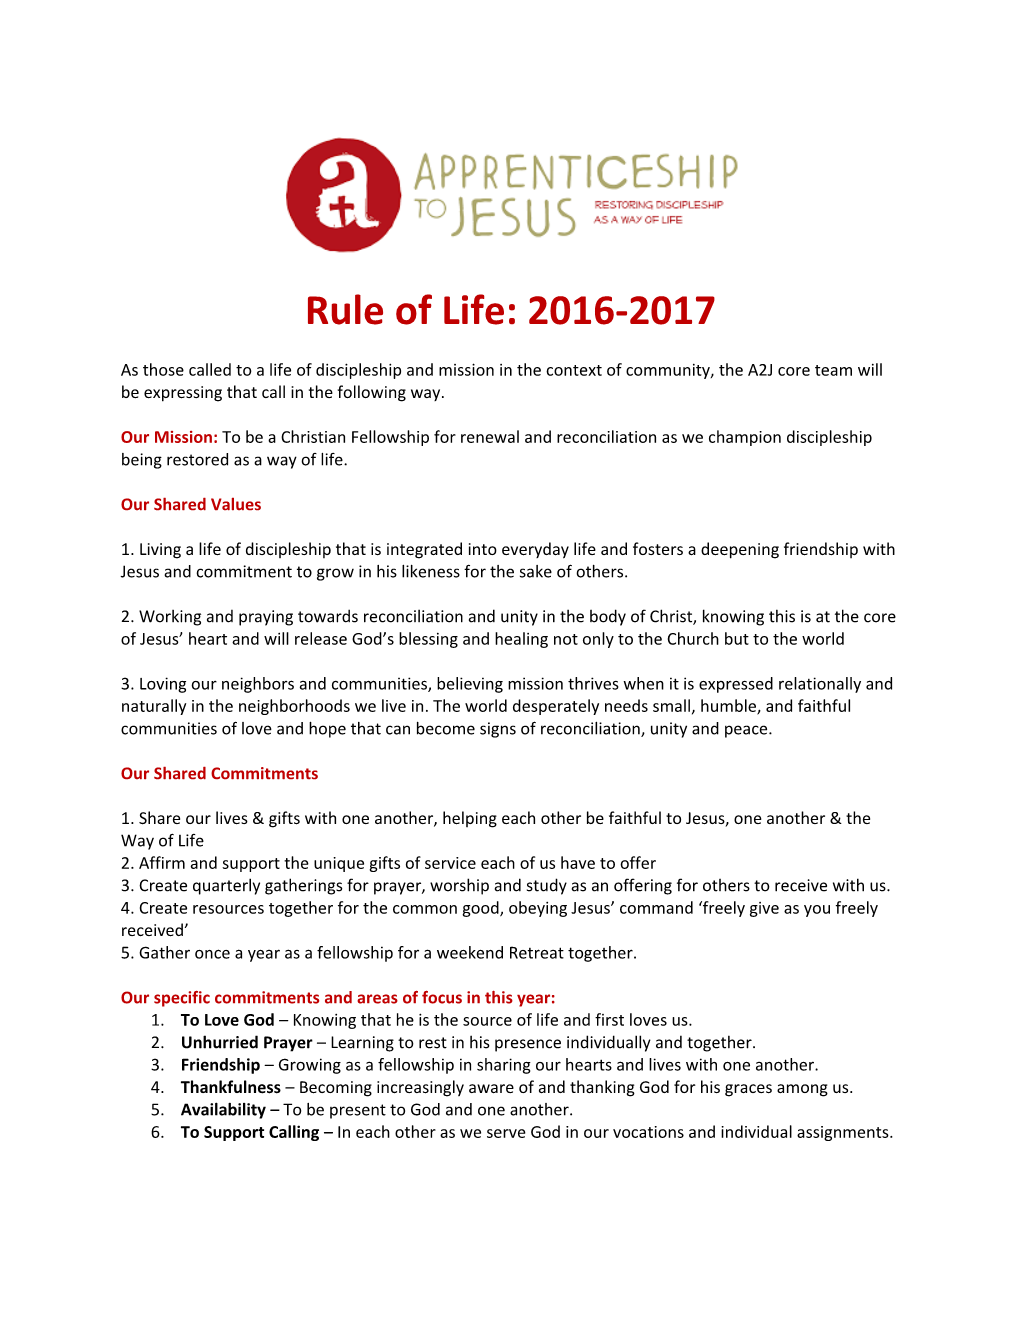 As Those Called to a Life of Discipleship and Mission in the Context of Community, The